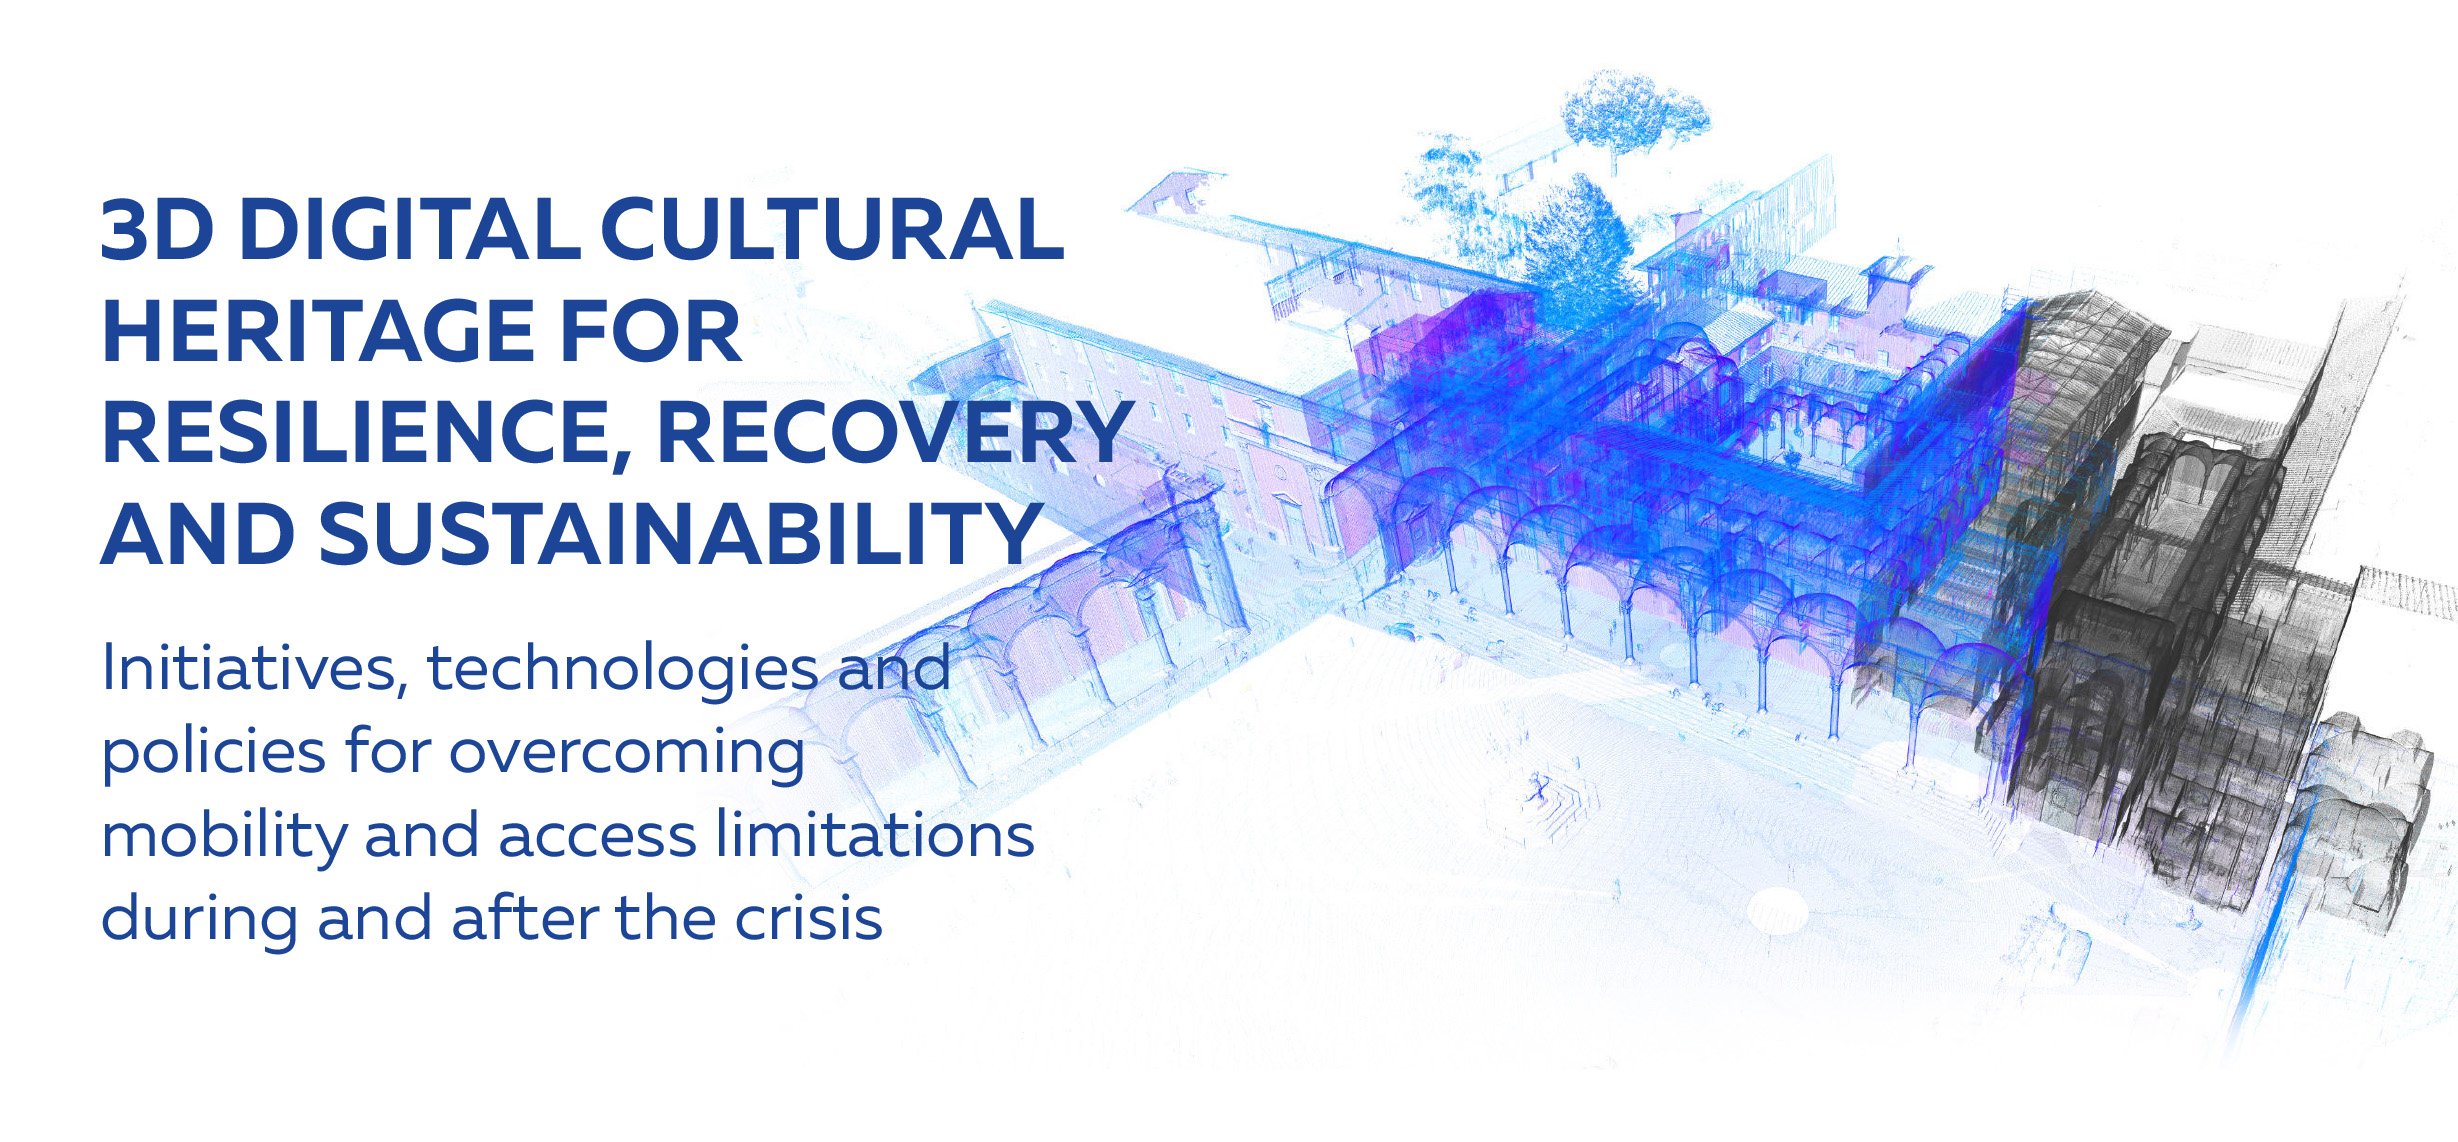 3D Digital Cultural Heritage for resilience, recovery & sustainability